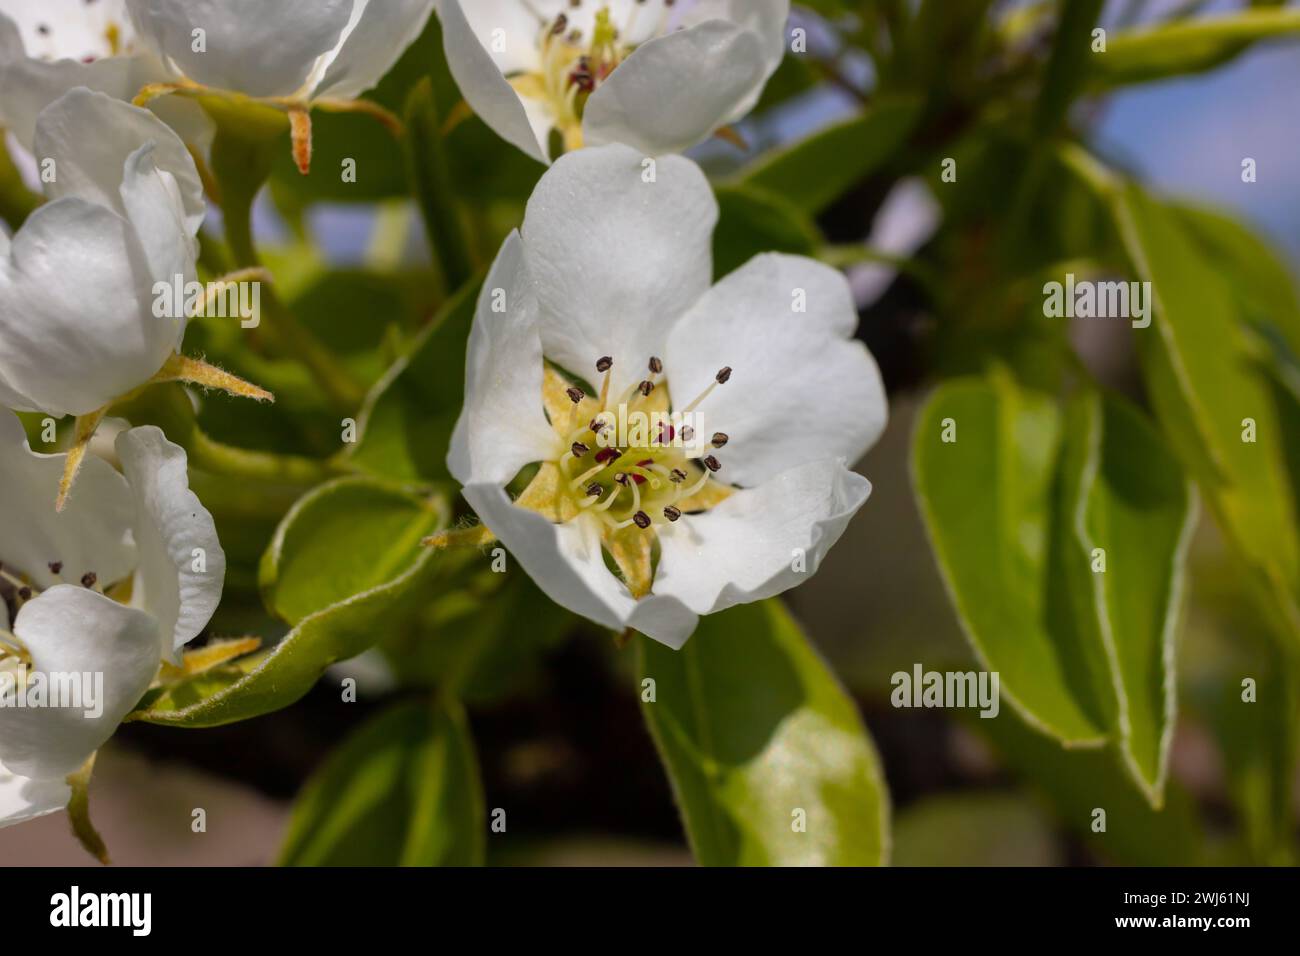 Pear tree flowers up close. white flowers and buds of the fruit tree. Sunlight falls on pear flowers. At dawn, the flowers of the trees look beautiful Stock Photo